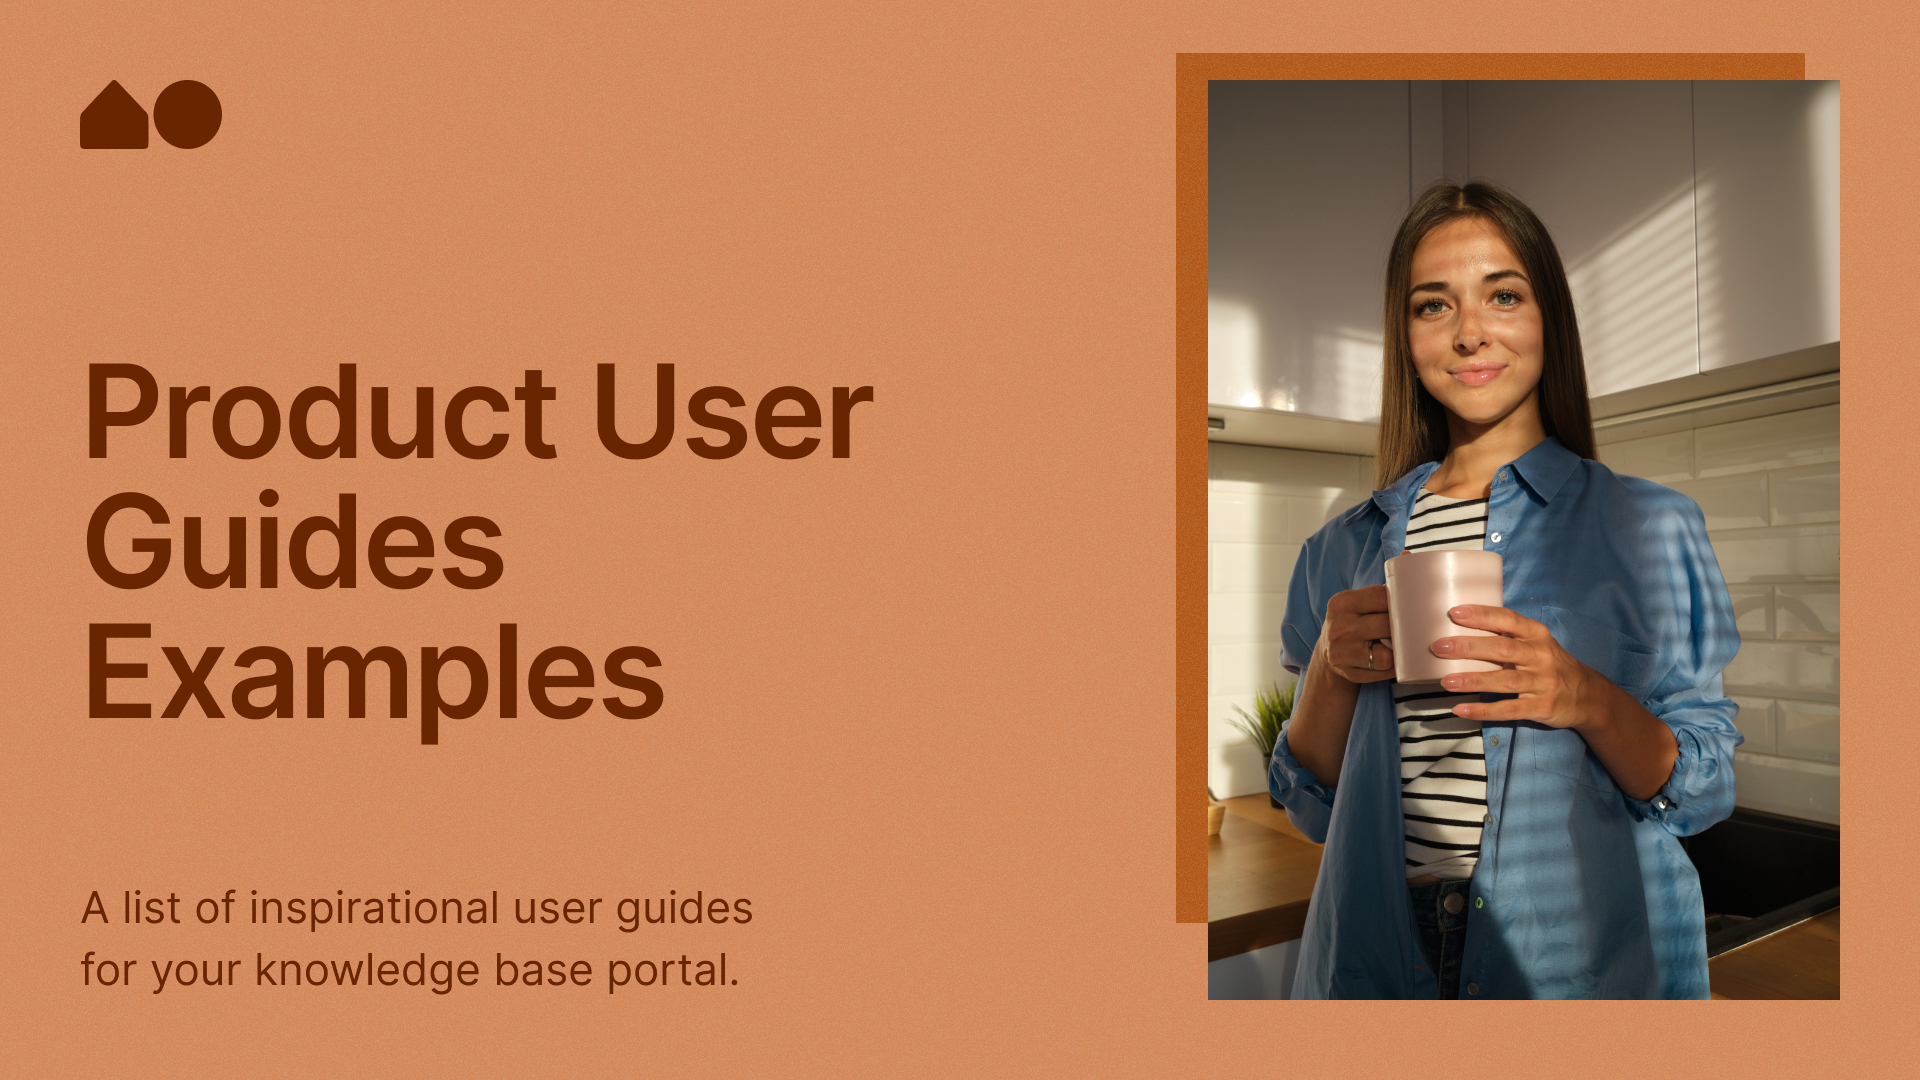 User guide examples you can use in 2023 for your product